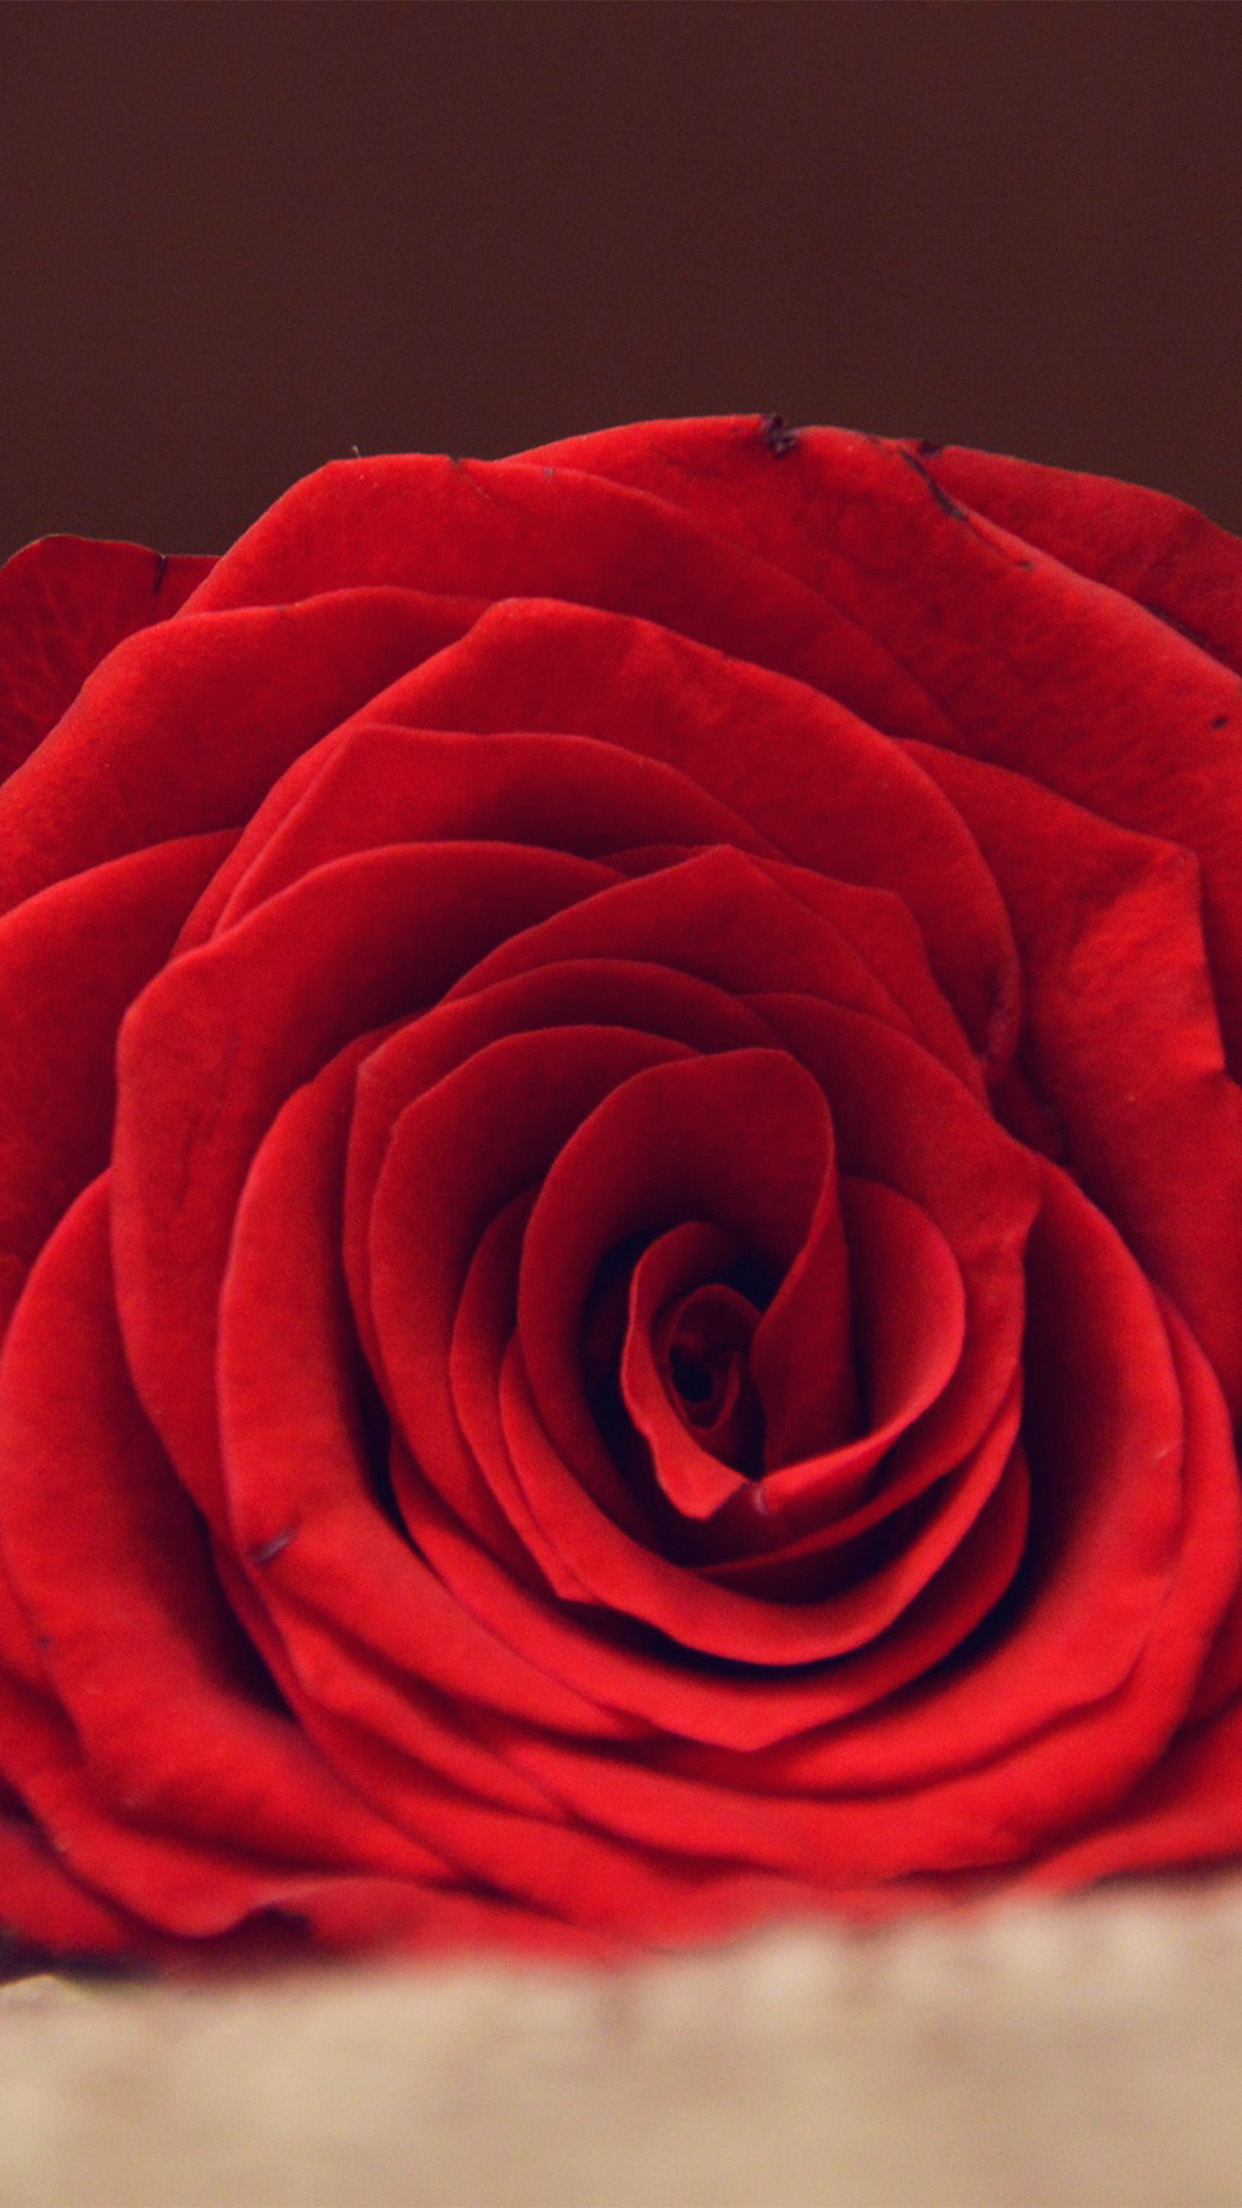 Iphone 7 Plus - Red Rose Wallpaper For Iphone 8 Plus , HD Wallpaper & Backgrounds